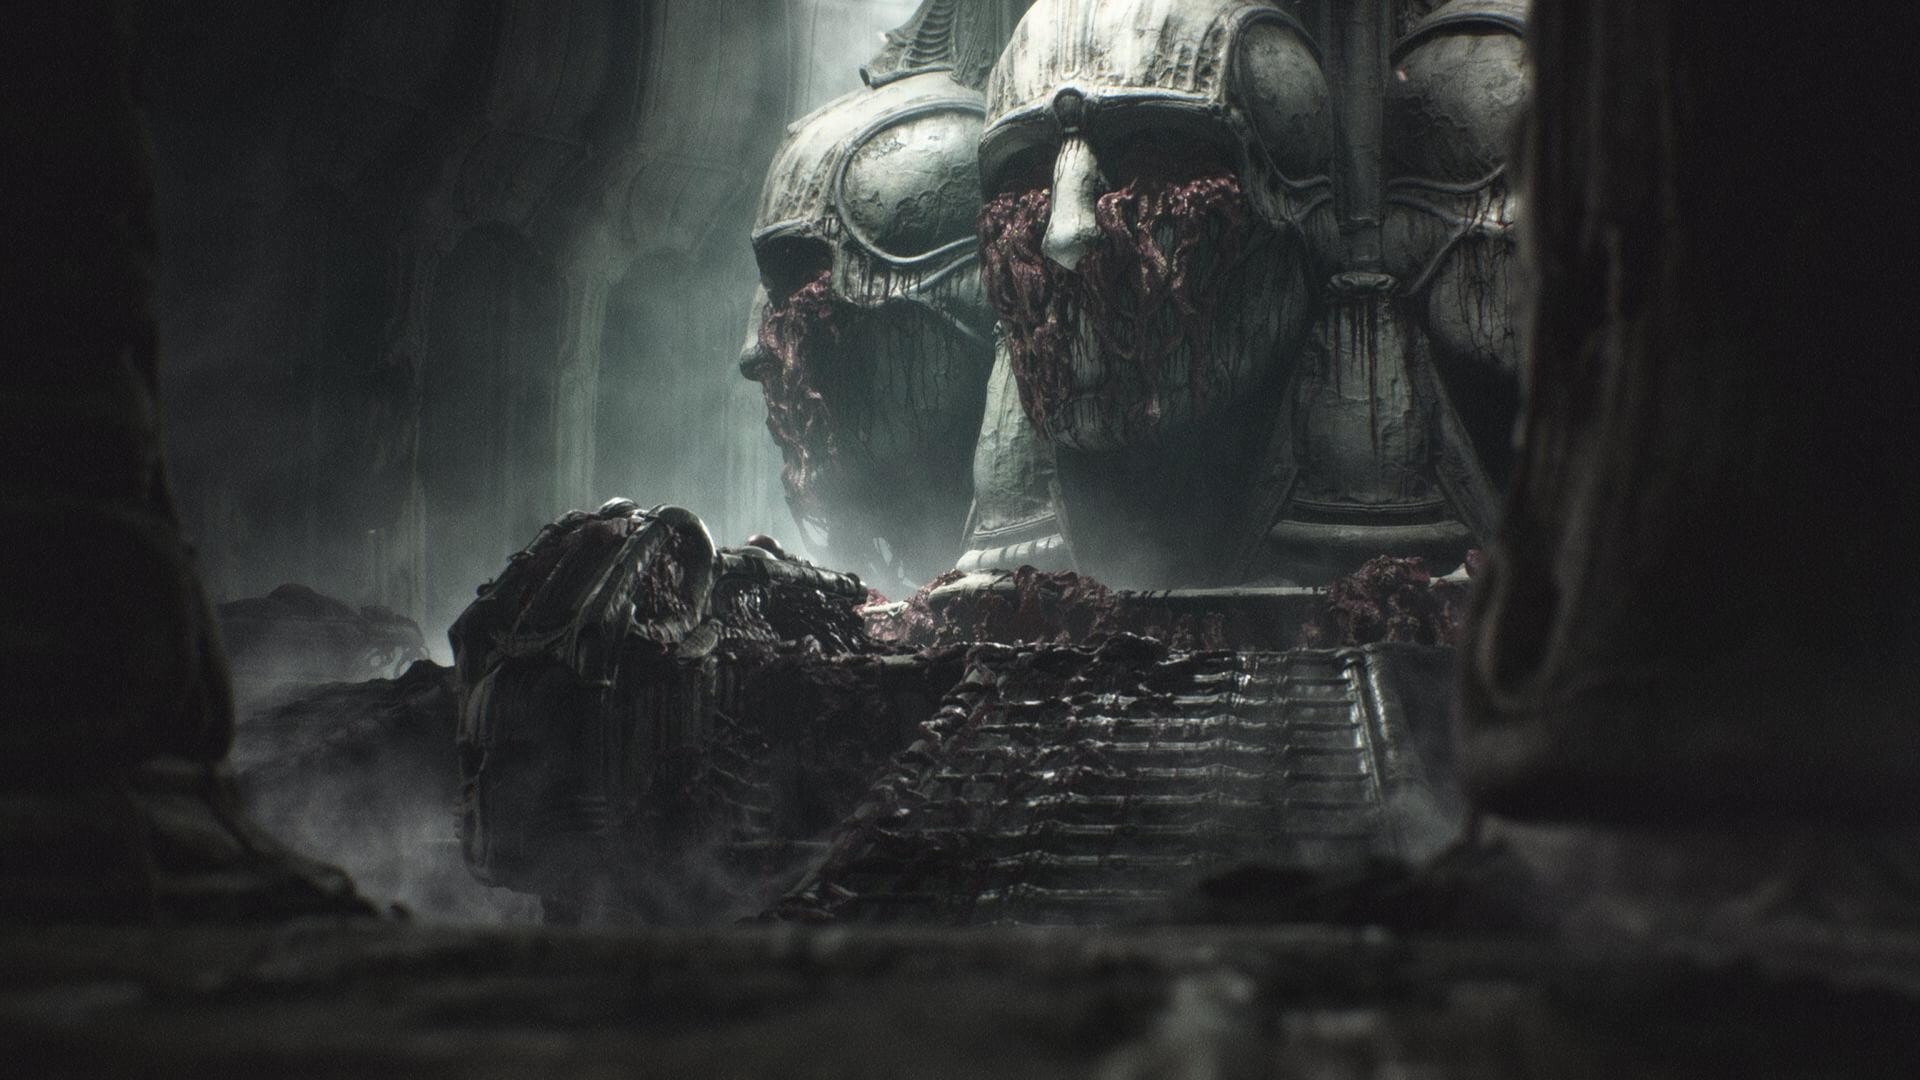 H.R. Giger: Scorn, The First-Person Biopunk Shooter, Escaping The Nightmarish Alien Planet. 1920x1080 Full HD Background.